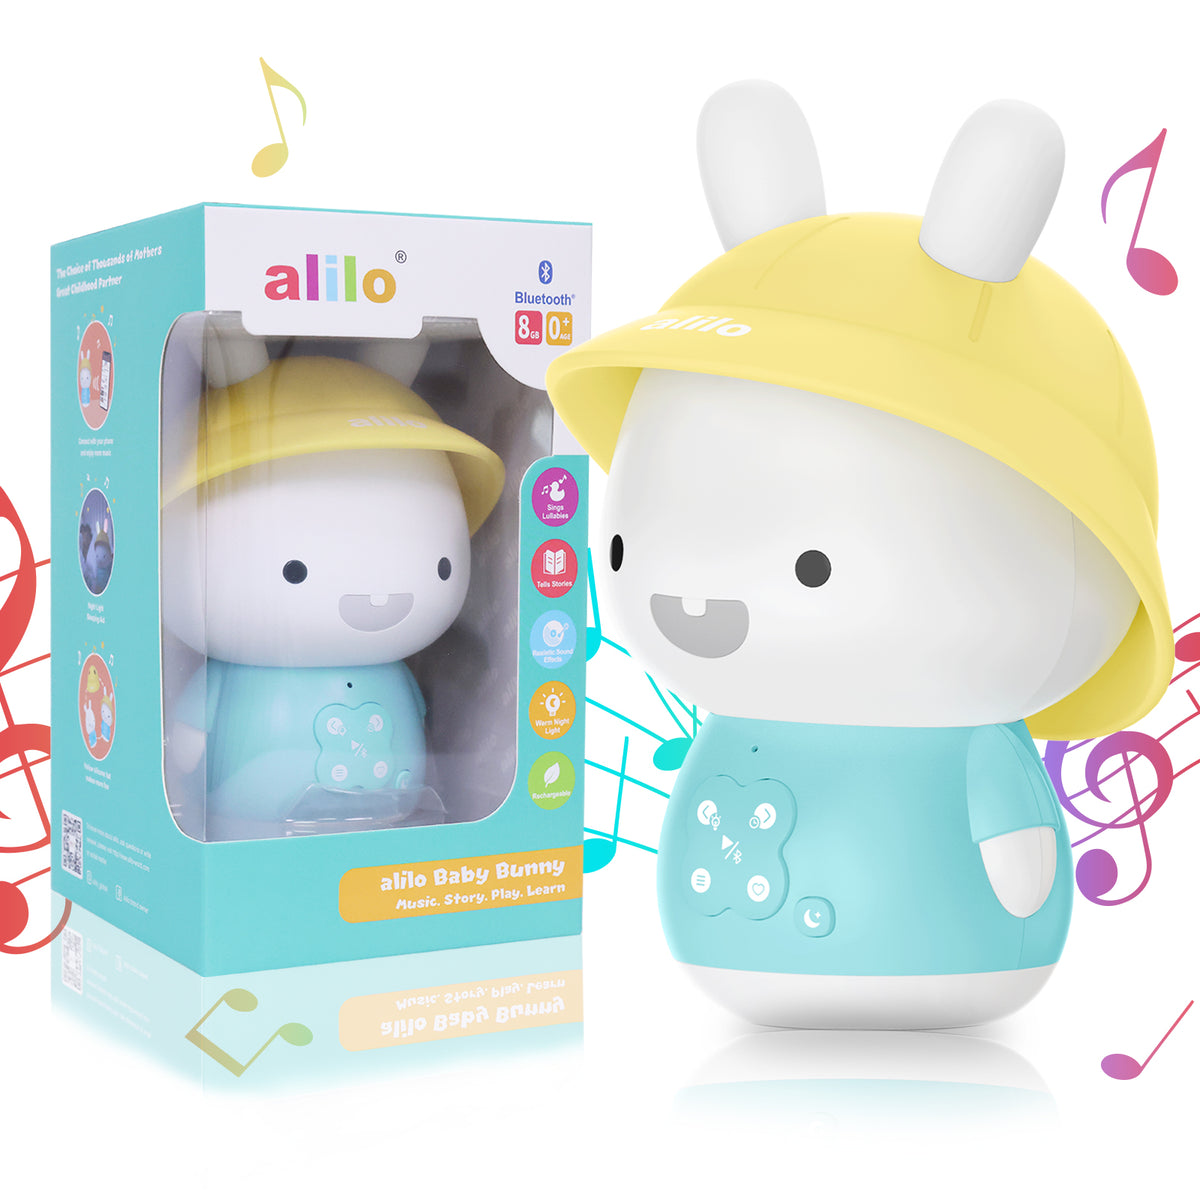 Alilo G9S Honey Bunny - Music, Stories, White Noise and More.